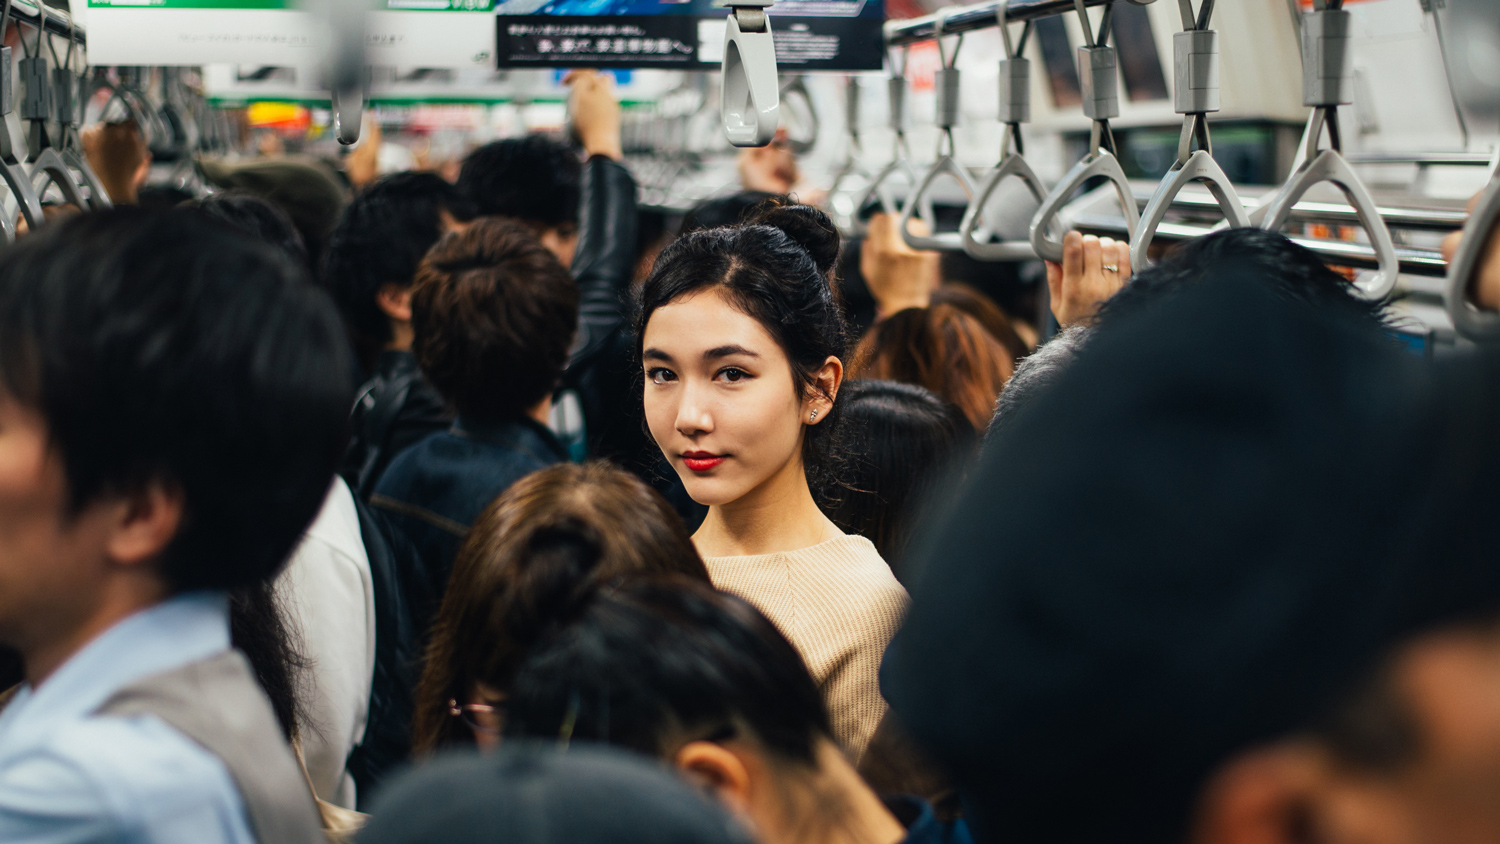 A woman standing on a crowded train looking directly at the camera.